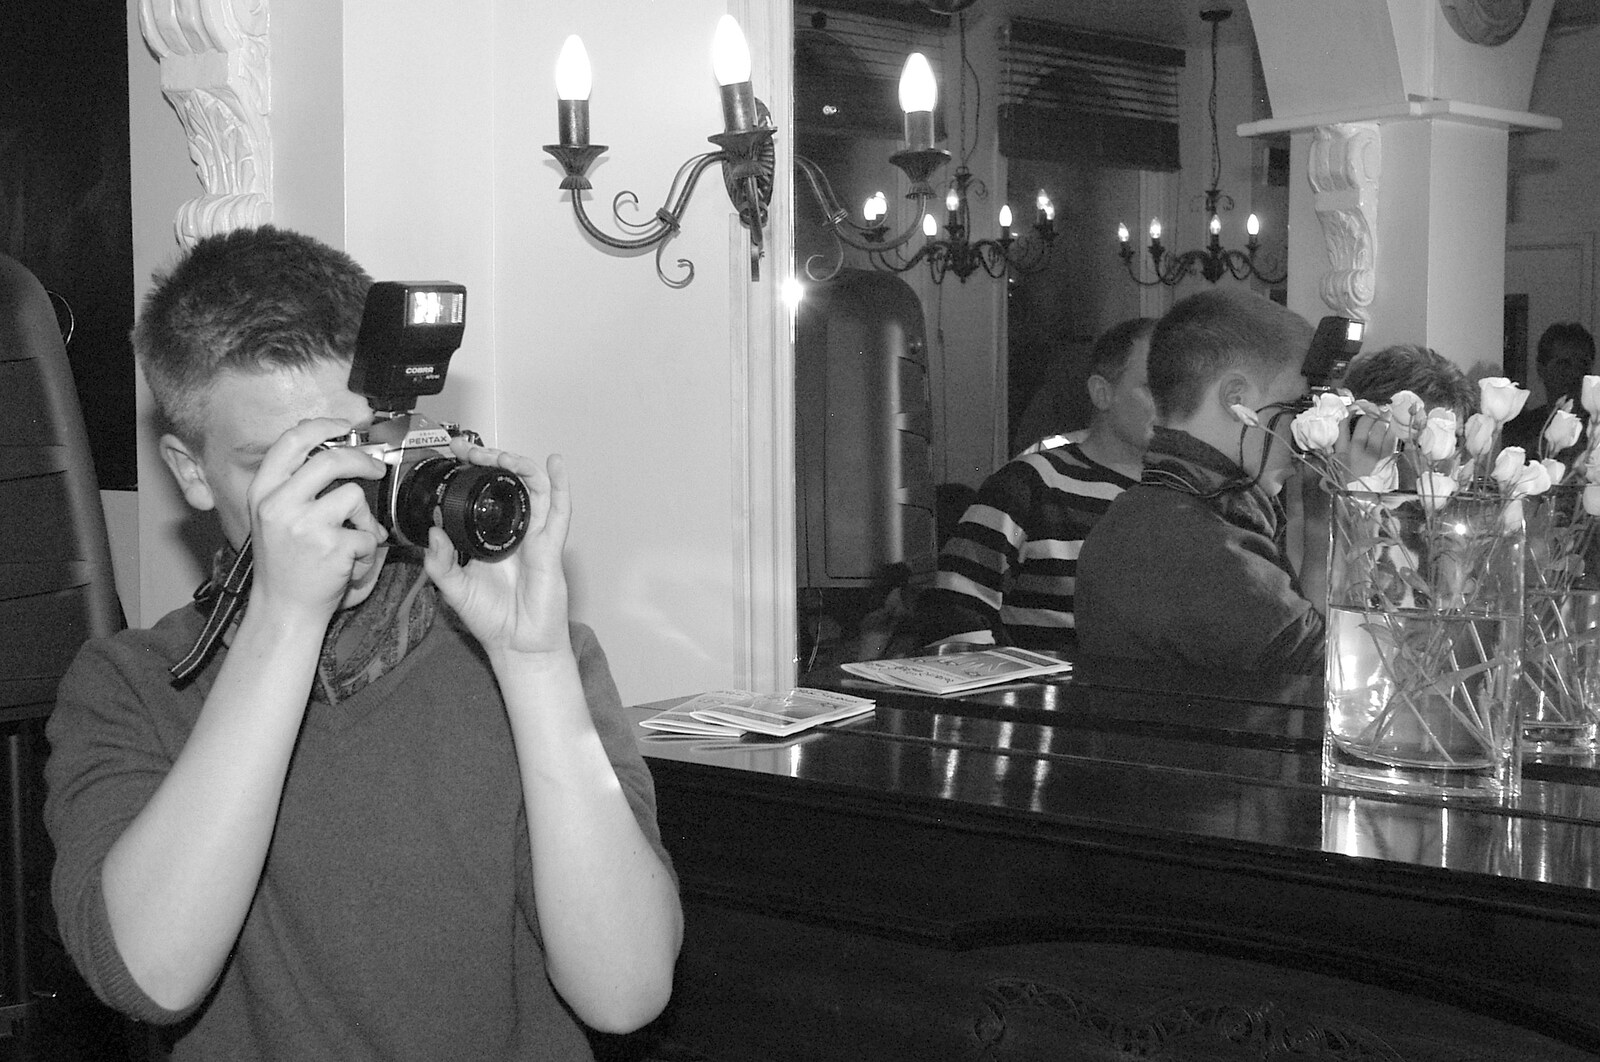 Rory Hill takes photos on a Pentax K-1000 from Most Haunted, and Music at Bar 13 and the Cherry Tree, Mellis - 26th November 2005